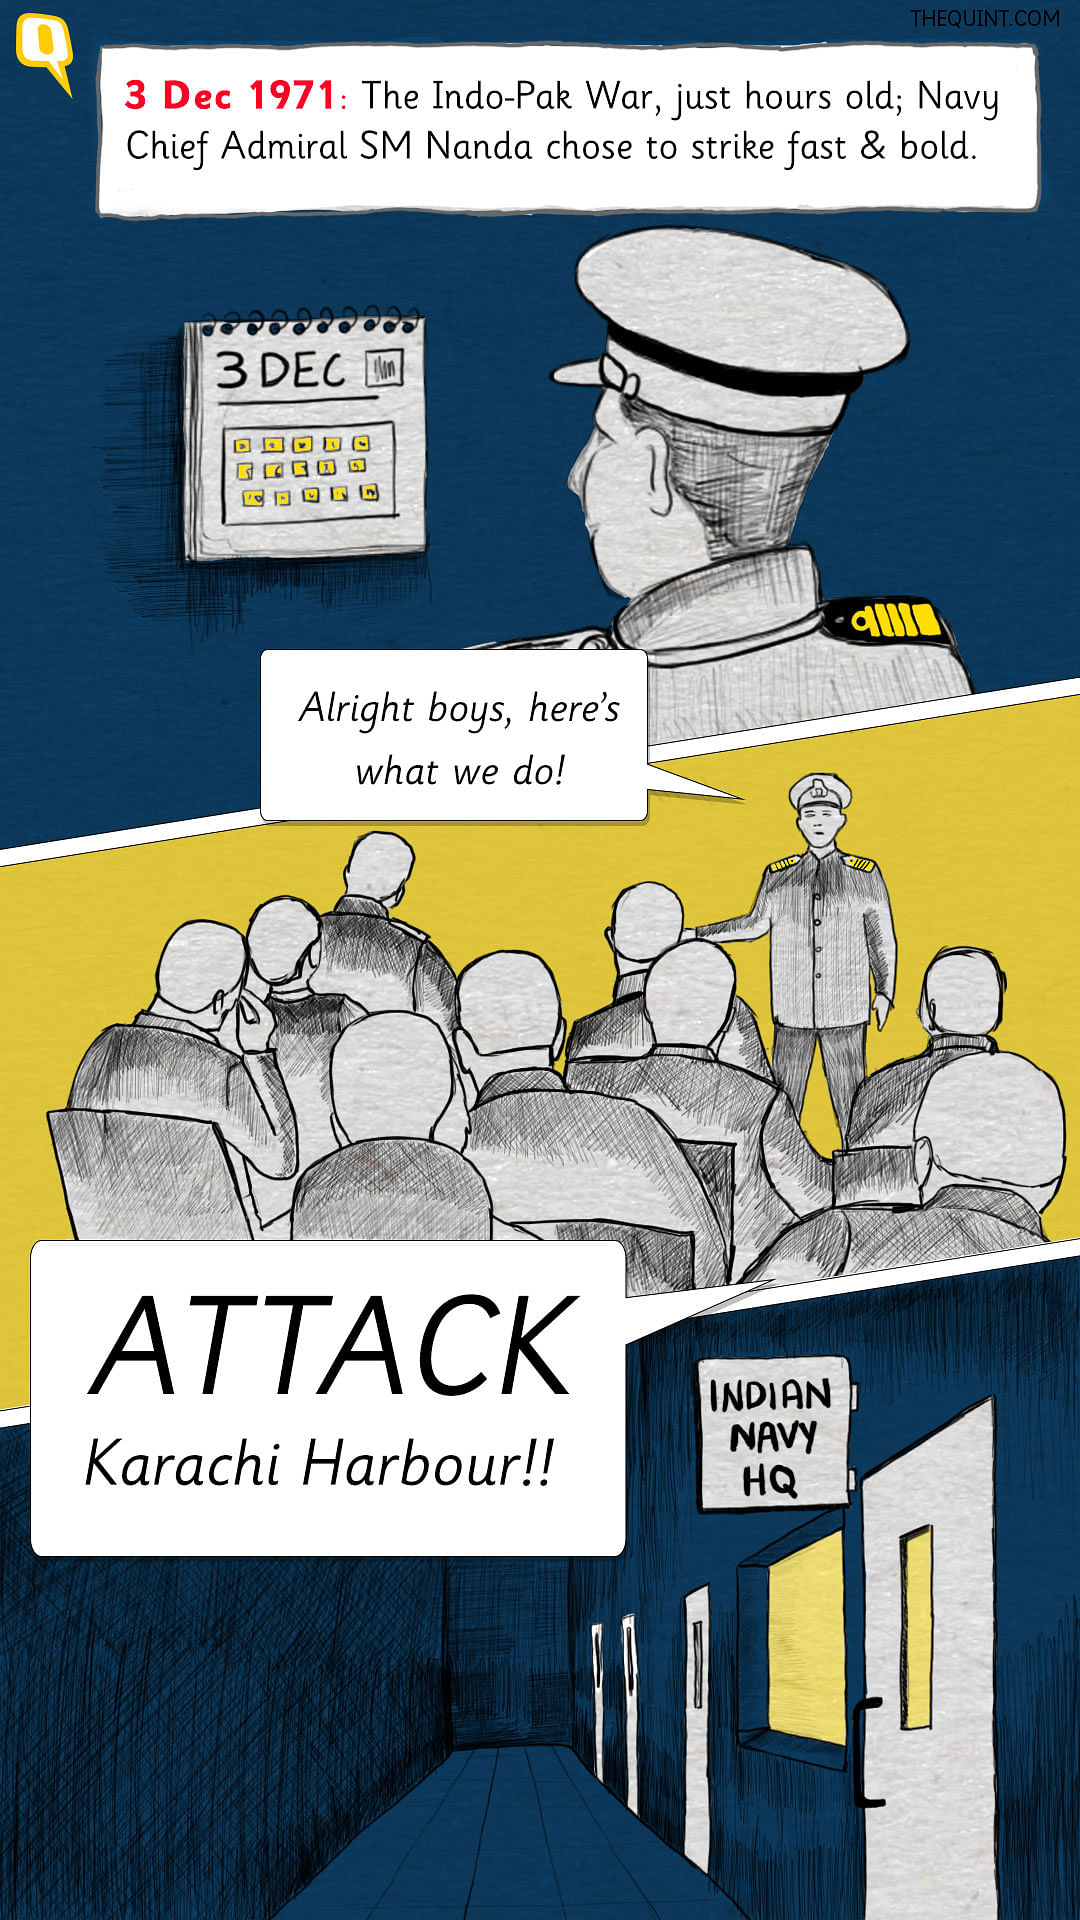 The Day India Bombed Karachi: Why We Celebrate 4 Dec as Navy Day